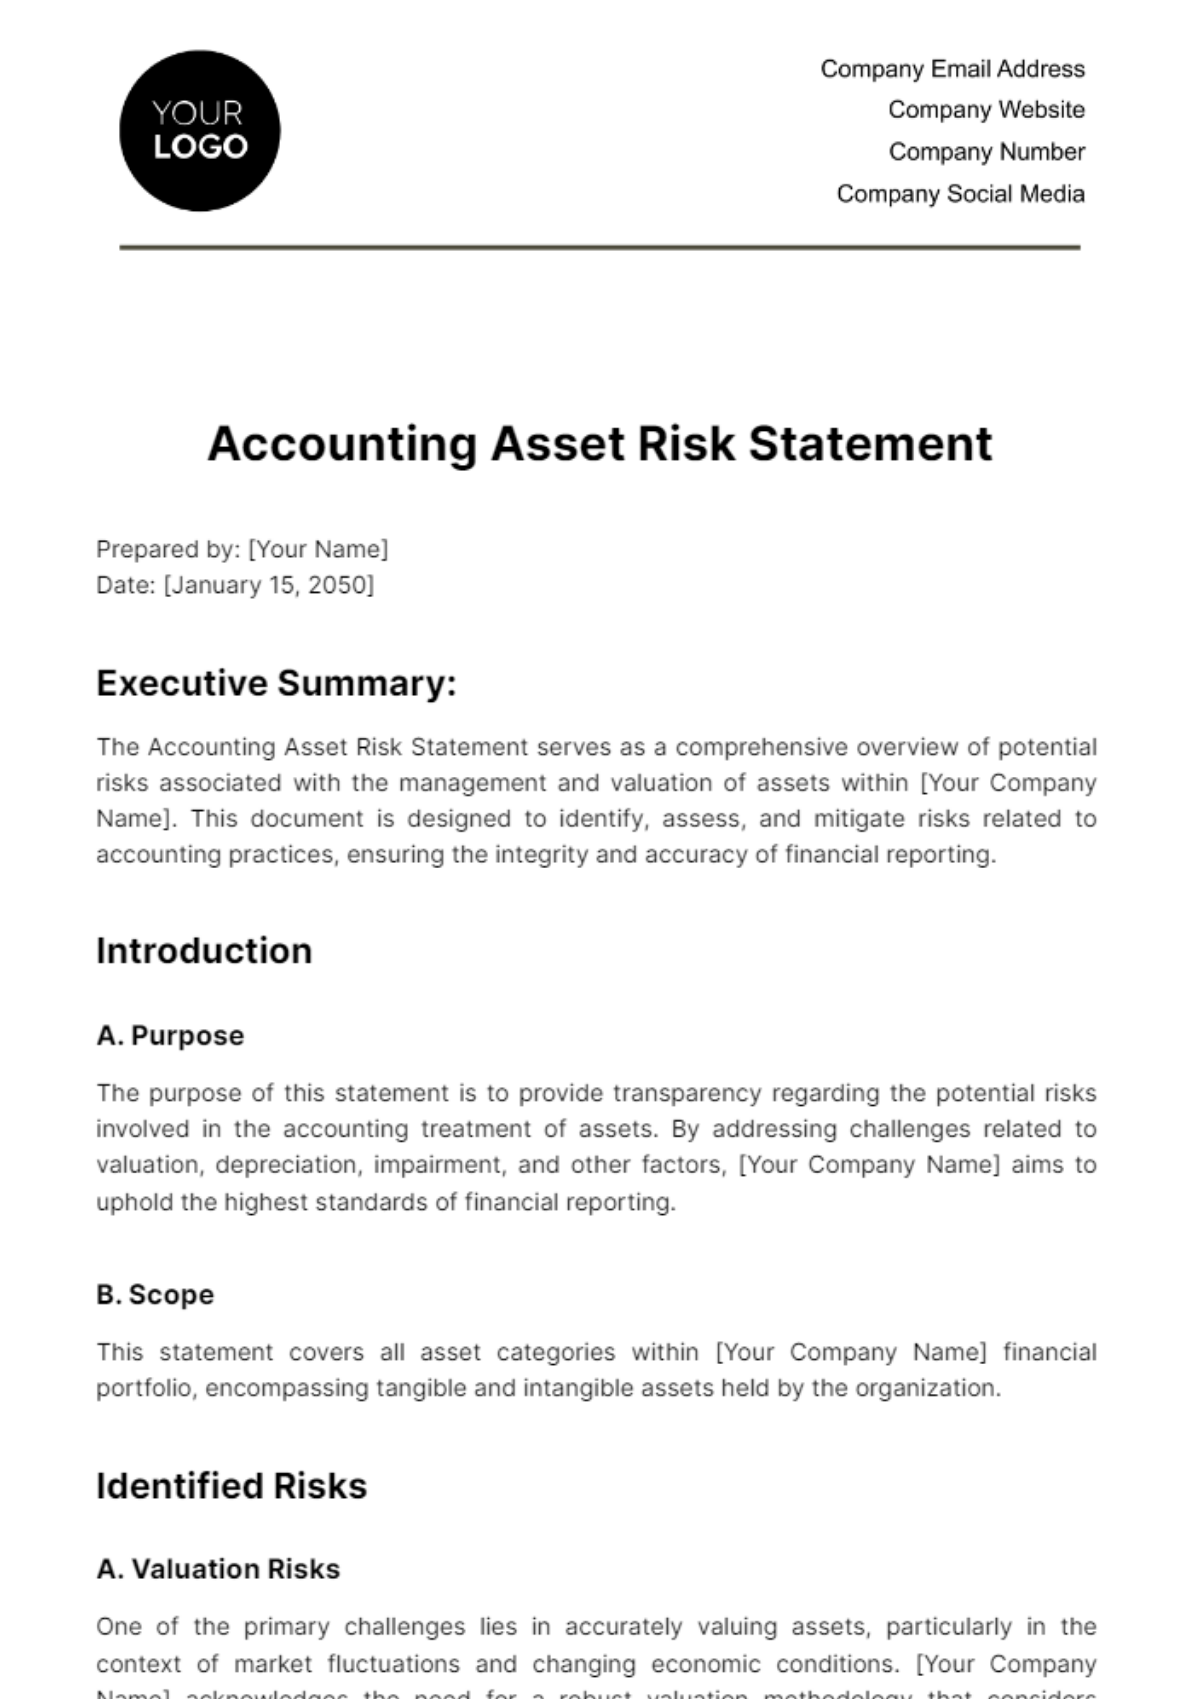 Accounting Asset Risk Statement Template